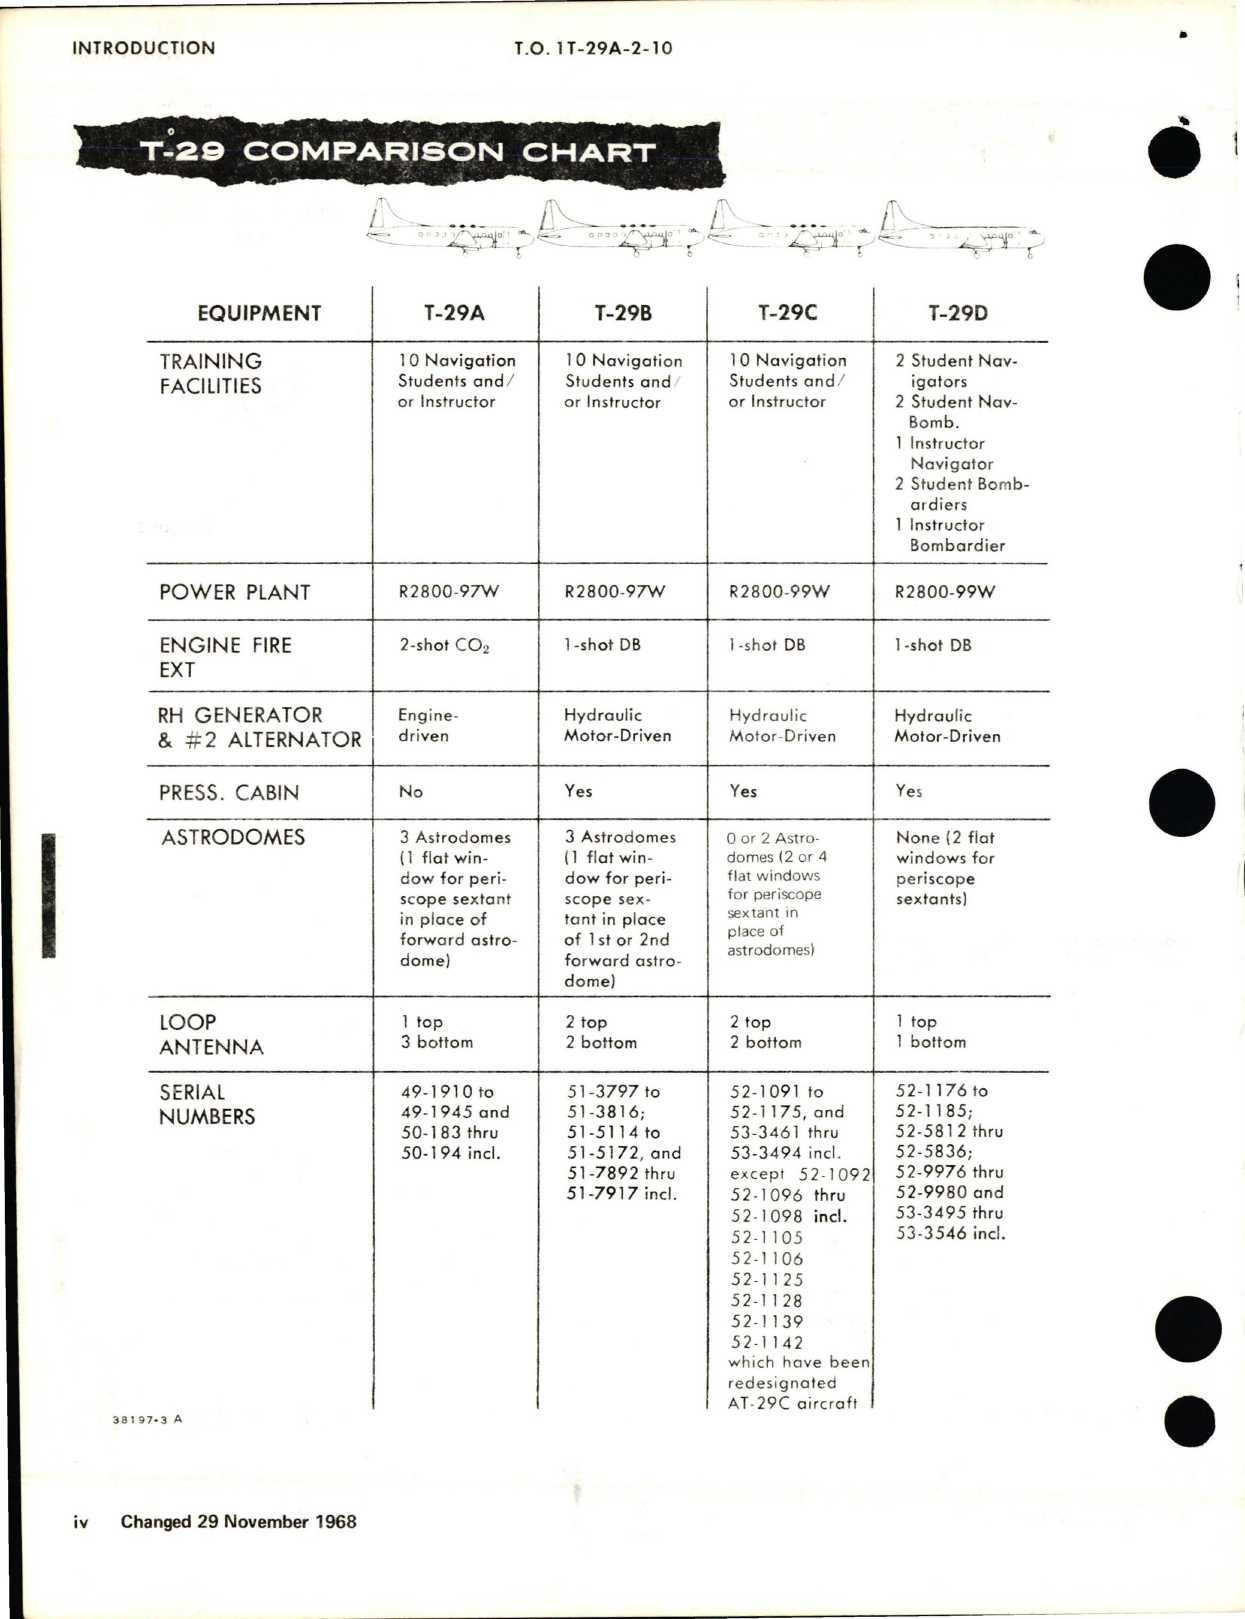 Sample page 8 from AirCorps Library document: Maintenance for Electrical Systems - T-29A, T-29B, T-29C and T-29D